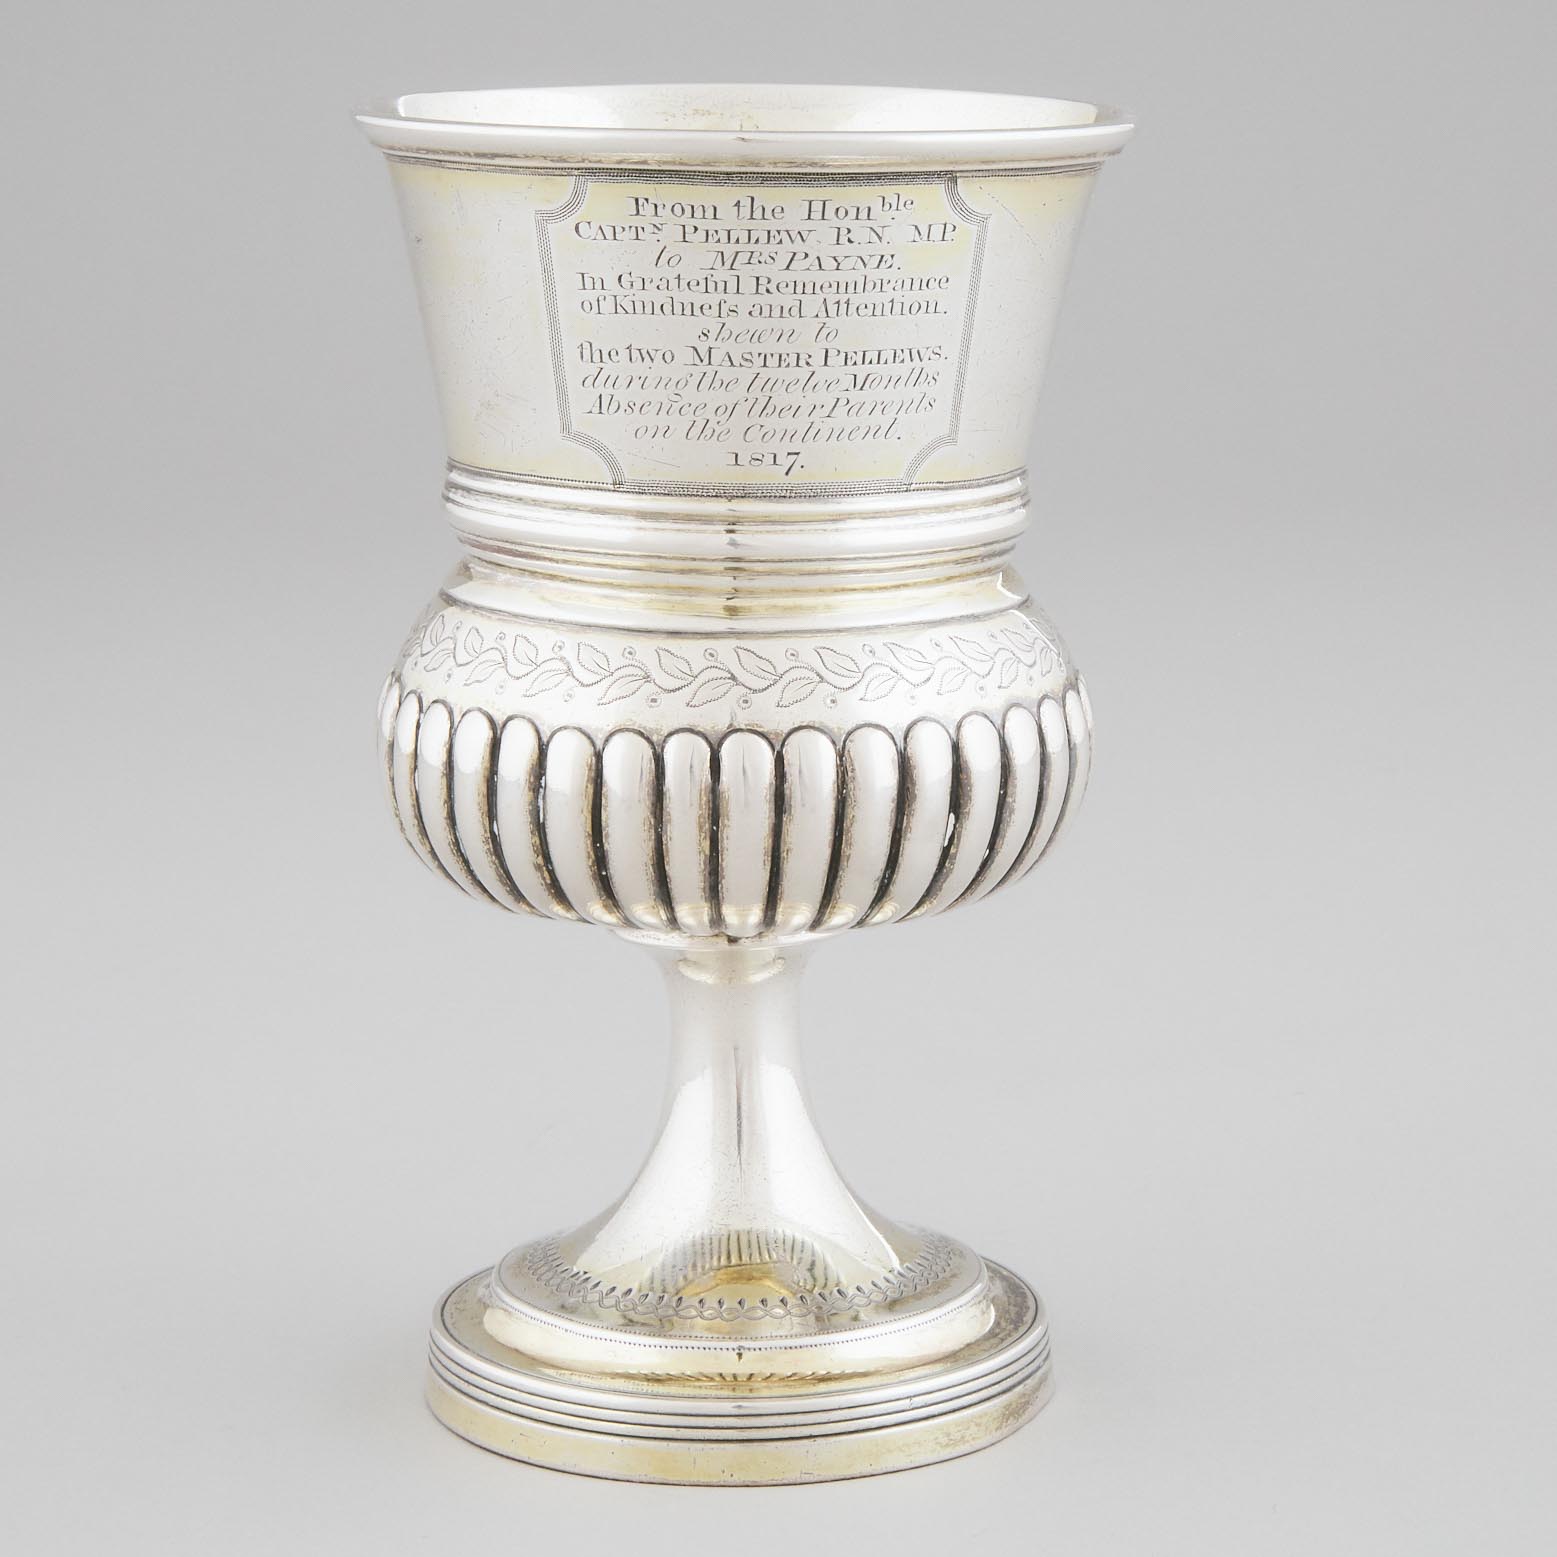 George III Silver Thistle Shaped Cup, Samuel Hennell & John Terry, London, 1814